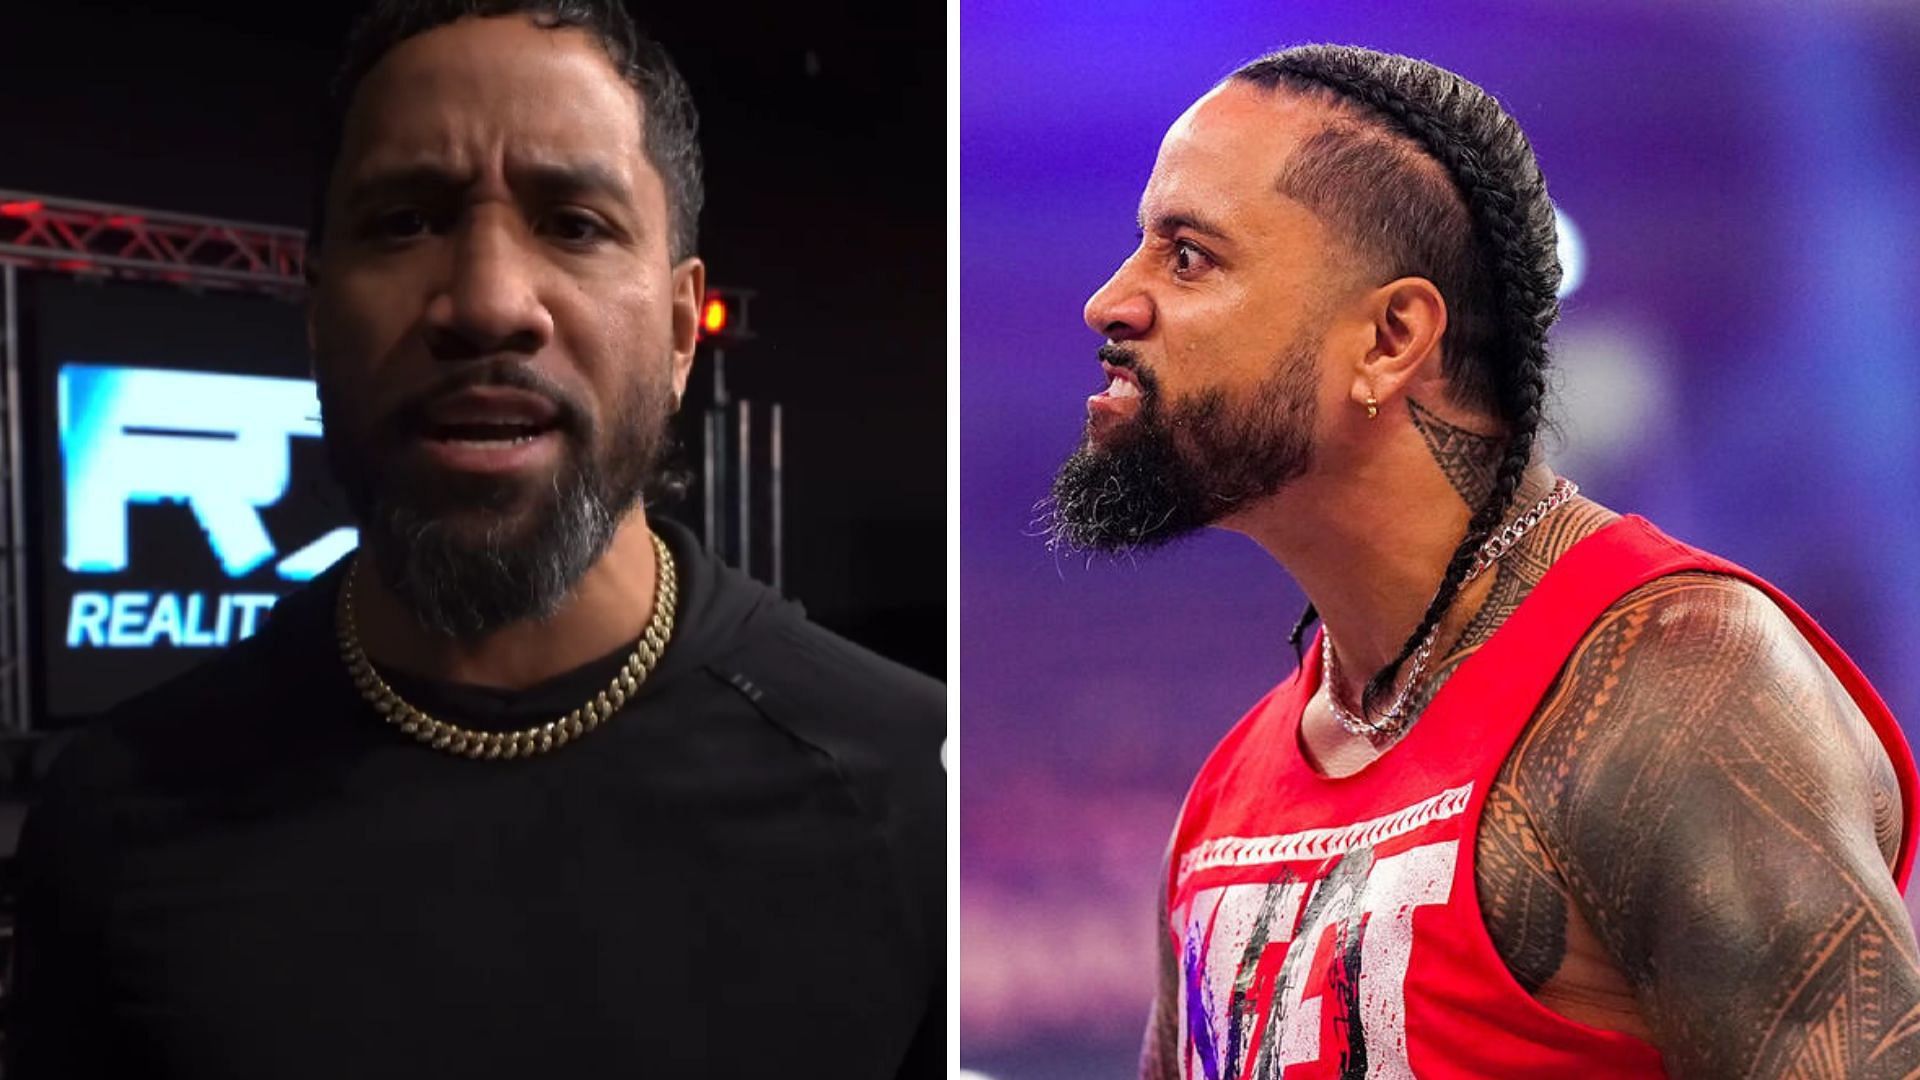 Jey Uso and Jimmy Uso are real-life twins [Image credits: Jey